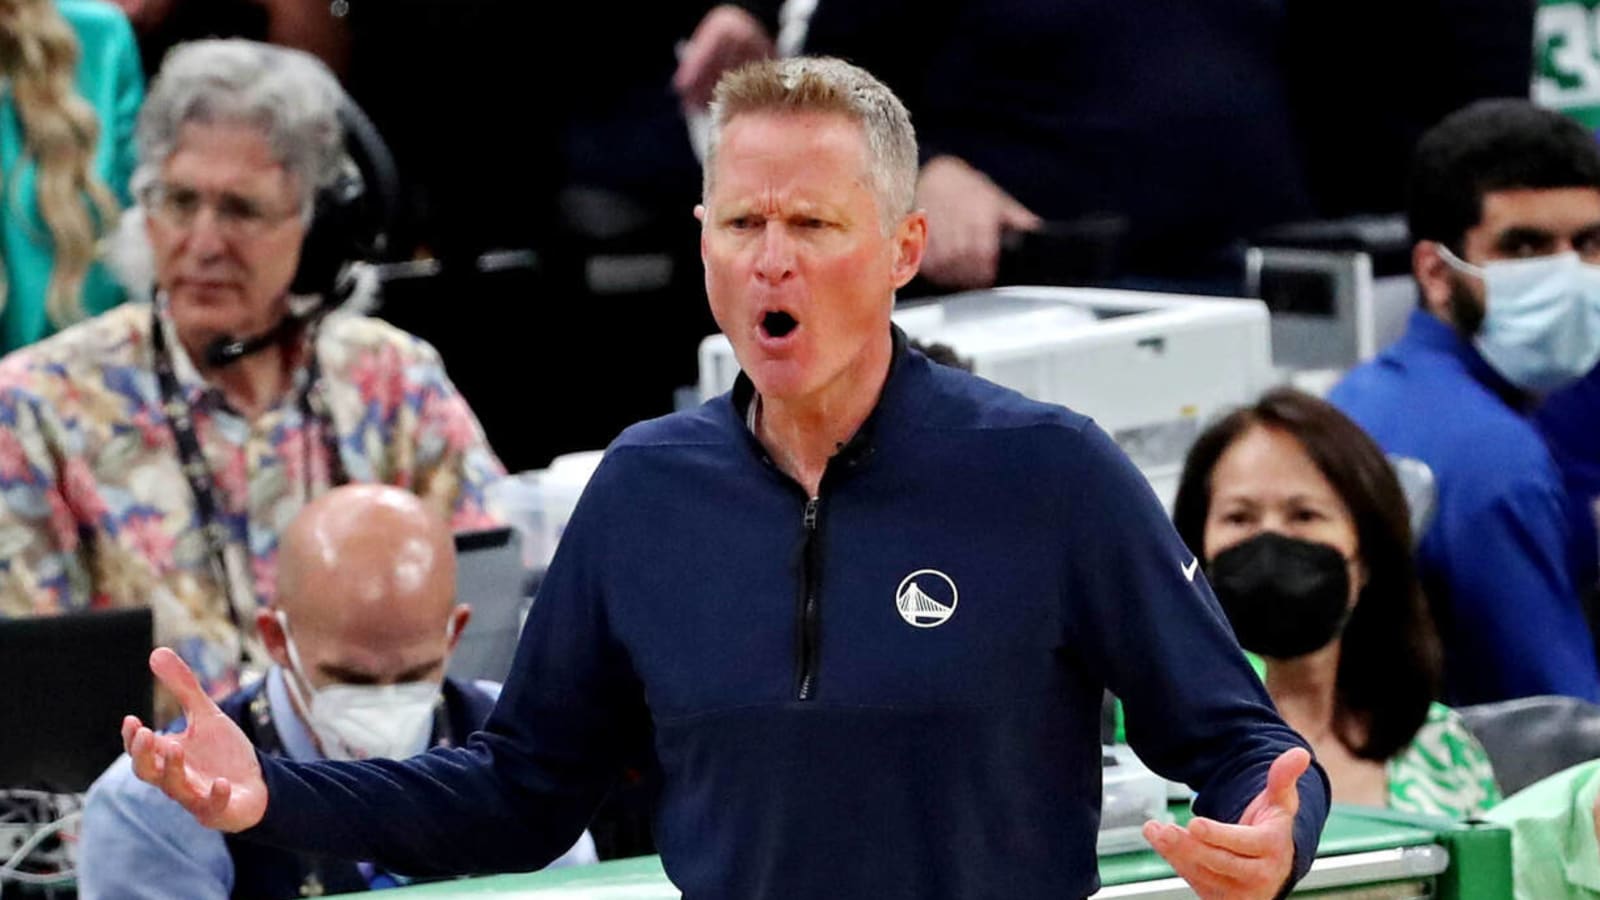 Watch: Steve Kerr called for technical foul after yelling at referees